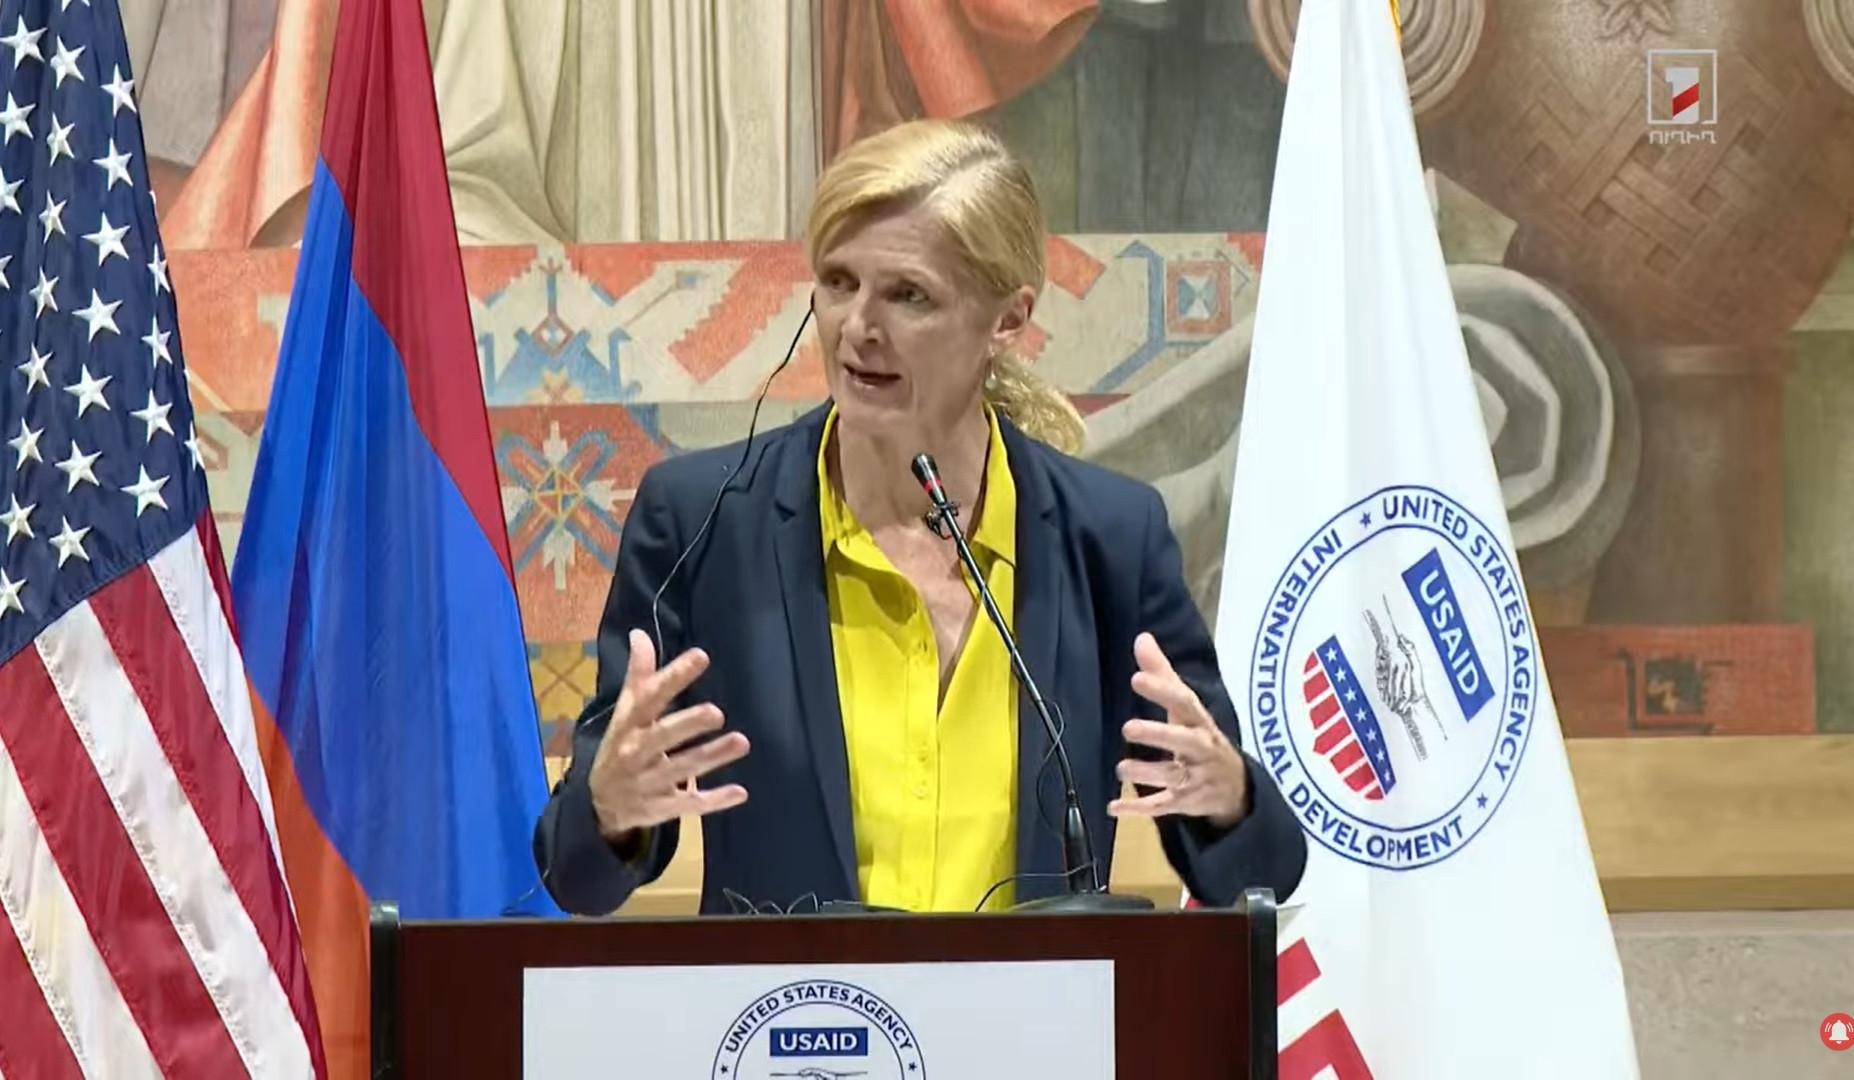 Prime Minister emphasizes government delivering results for citizens now, today, and here: Samantha Power on meeting with Pashinyan